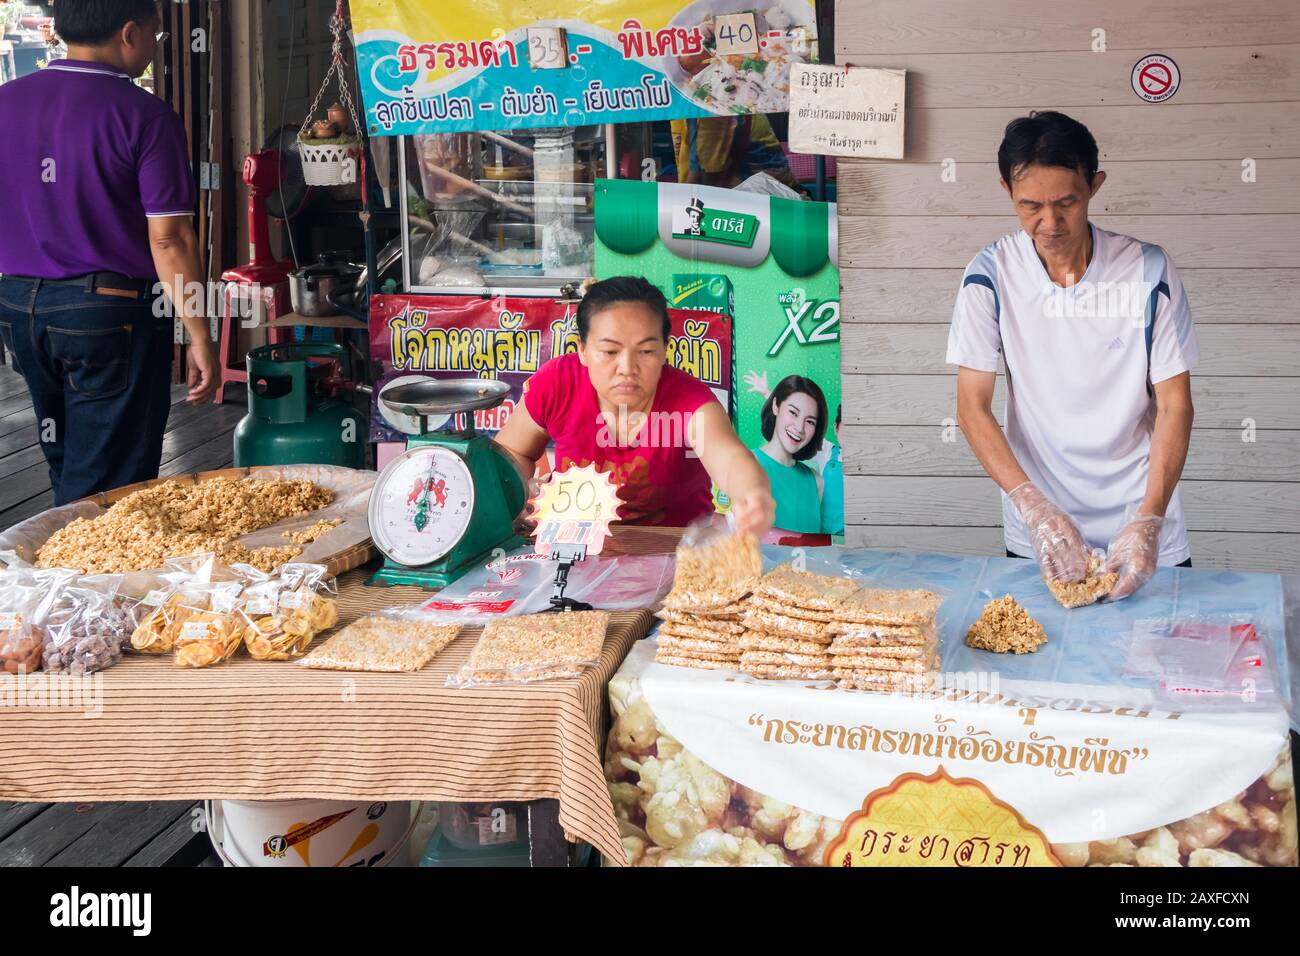 Bangkok, Thailand - January 11th 2020: Packaging and selling peanut toffee at Khlong Bang Luang Floating Market. The area is a popular tourist attract Stock Photo